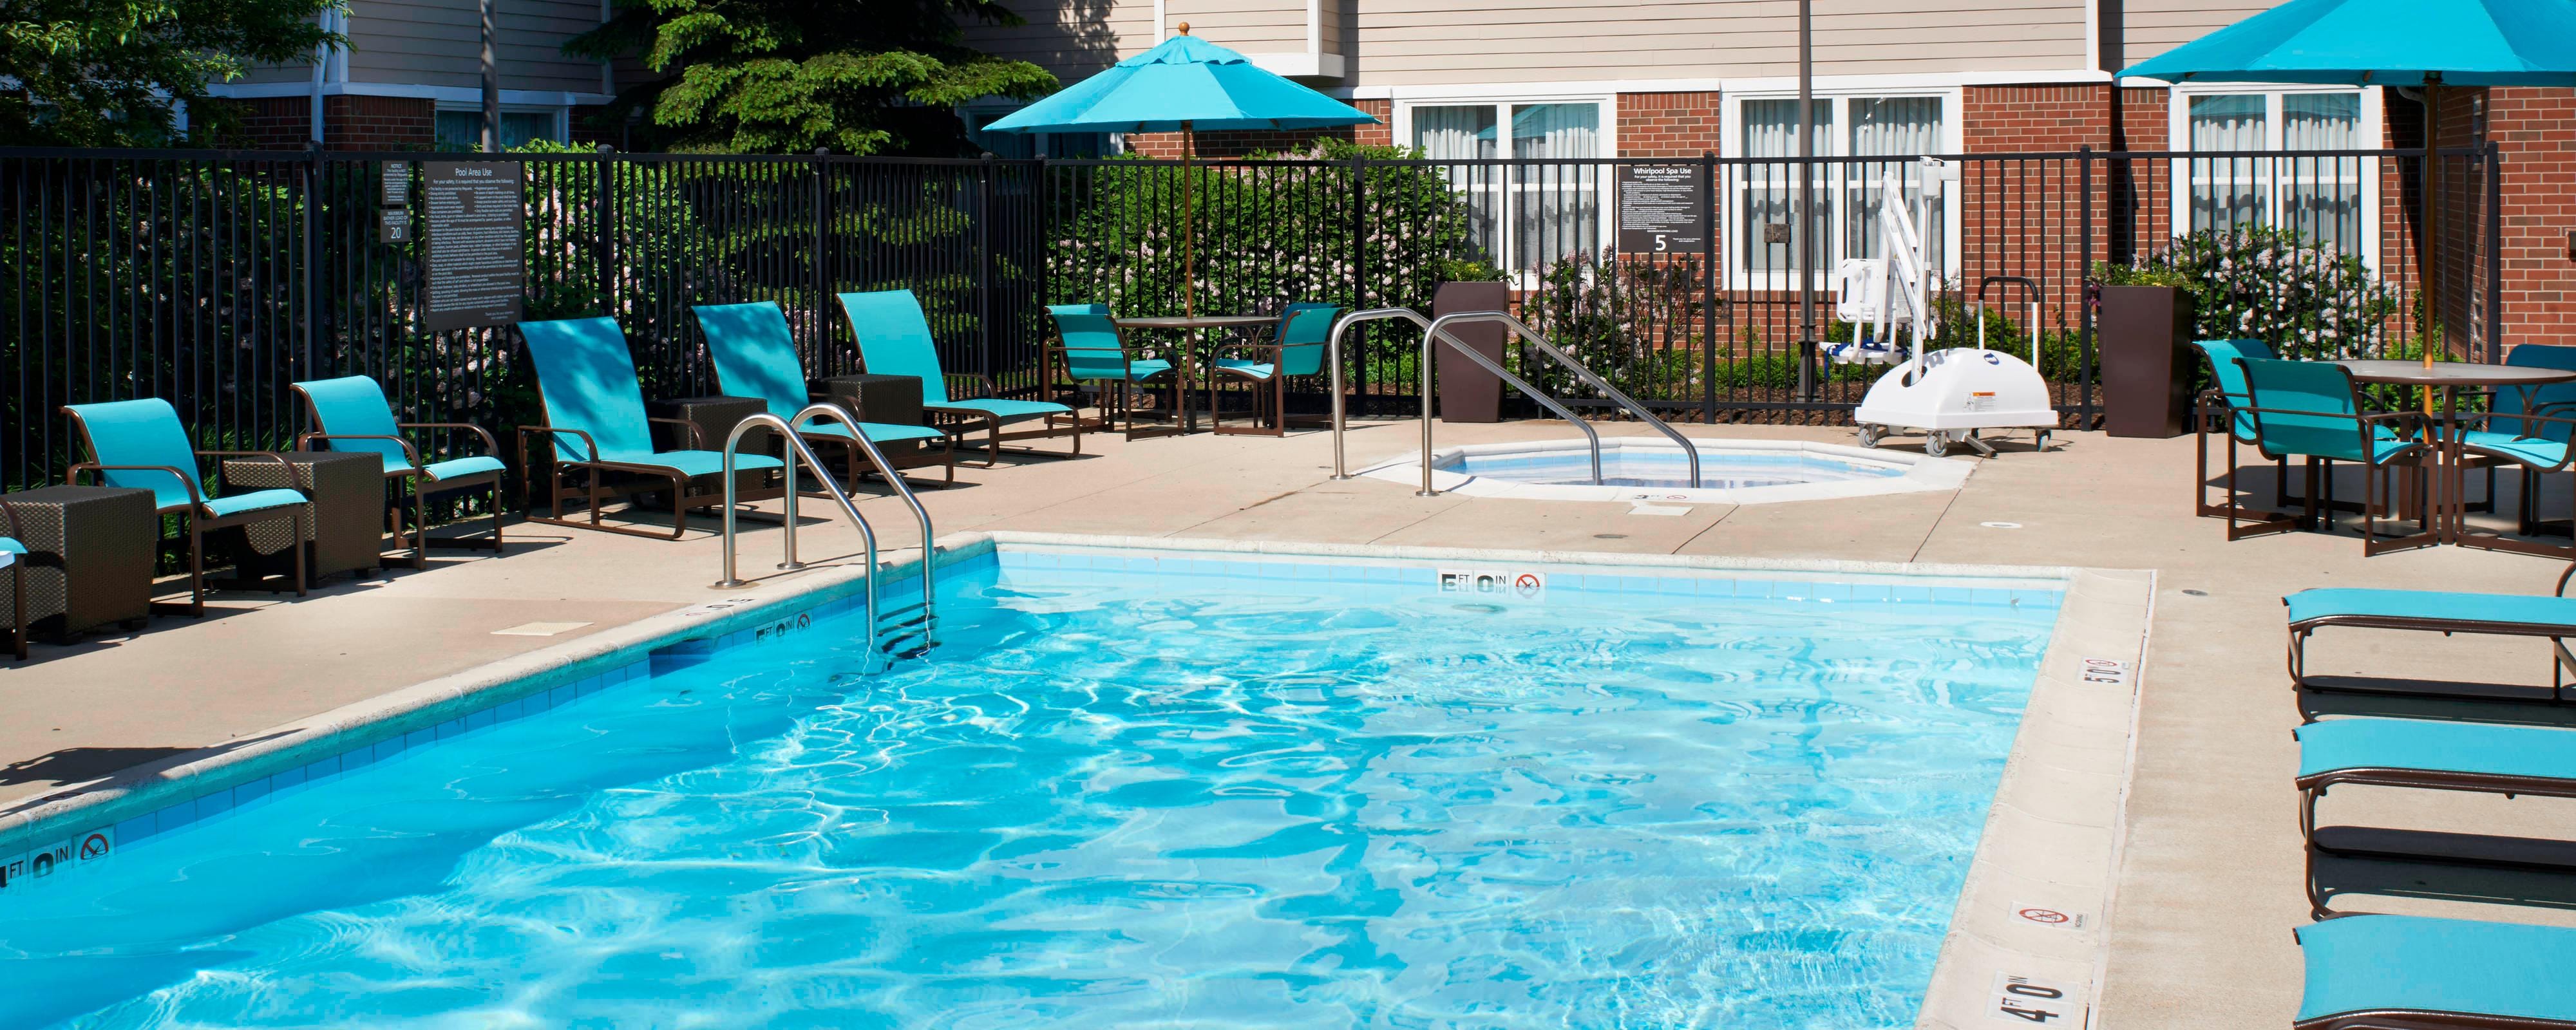 Extended Stay Hotels In Waukegan Il Residence Inn Chicago